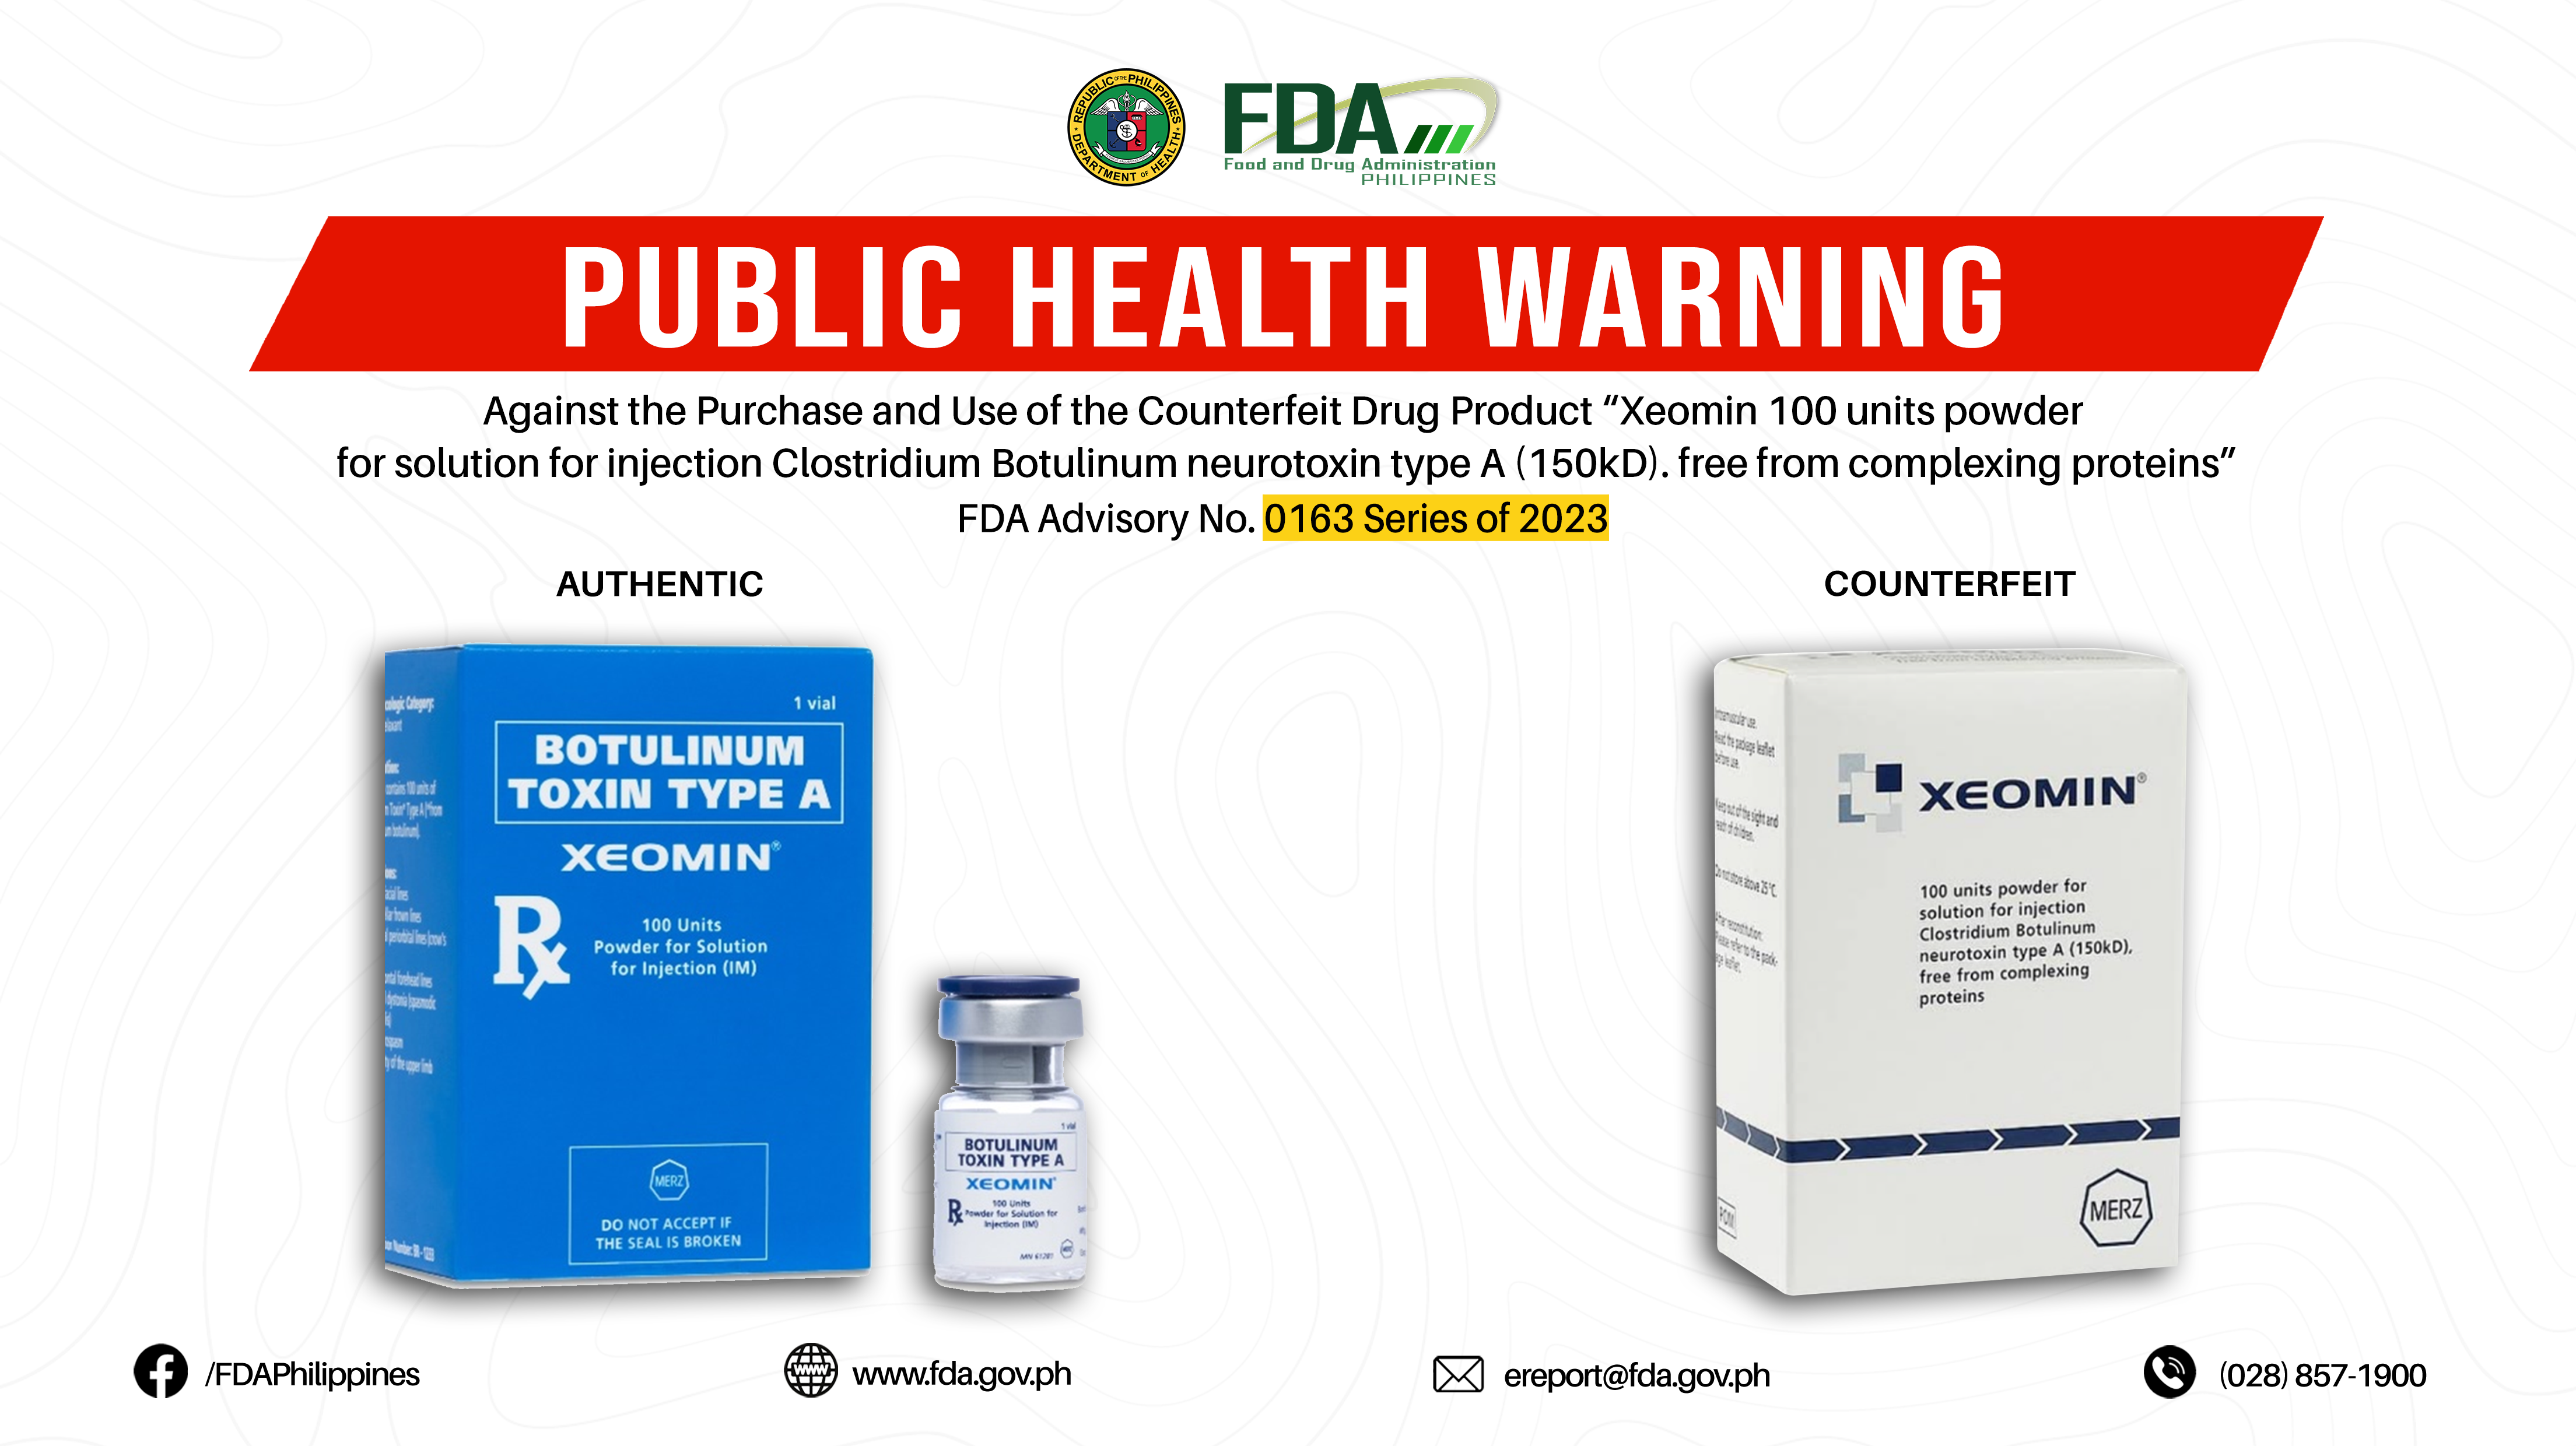 FDA Advisory No.2023-0163 || Public Health Warning Against the Purchase and Use of the Counterfeit Drug Product “Xeomin 100 units powder for solution for injection Clostridium Botulinum neurotoxin type A (150kD). free from complexing proteins”